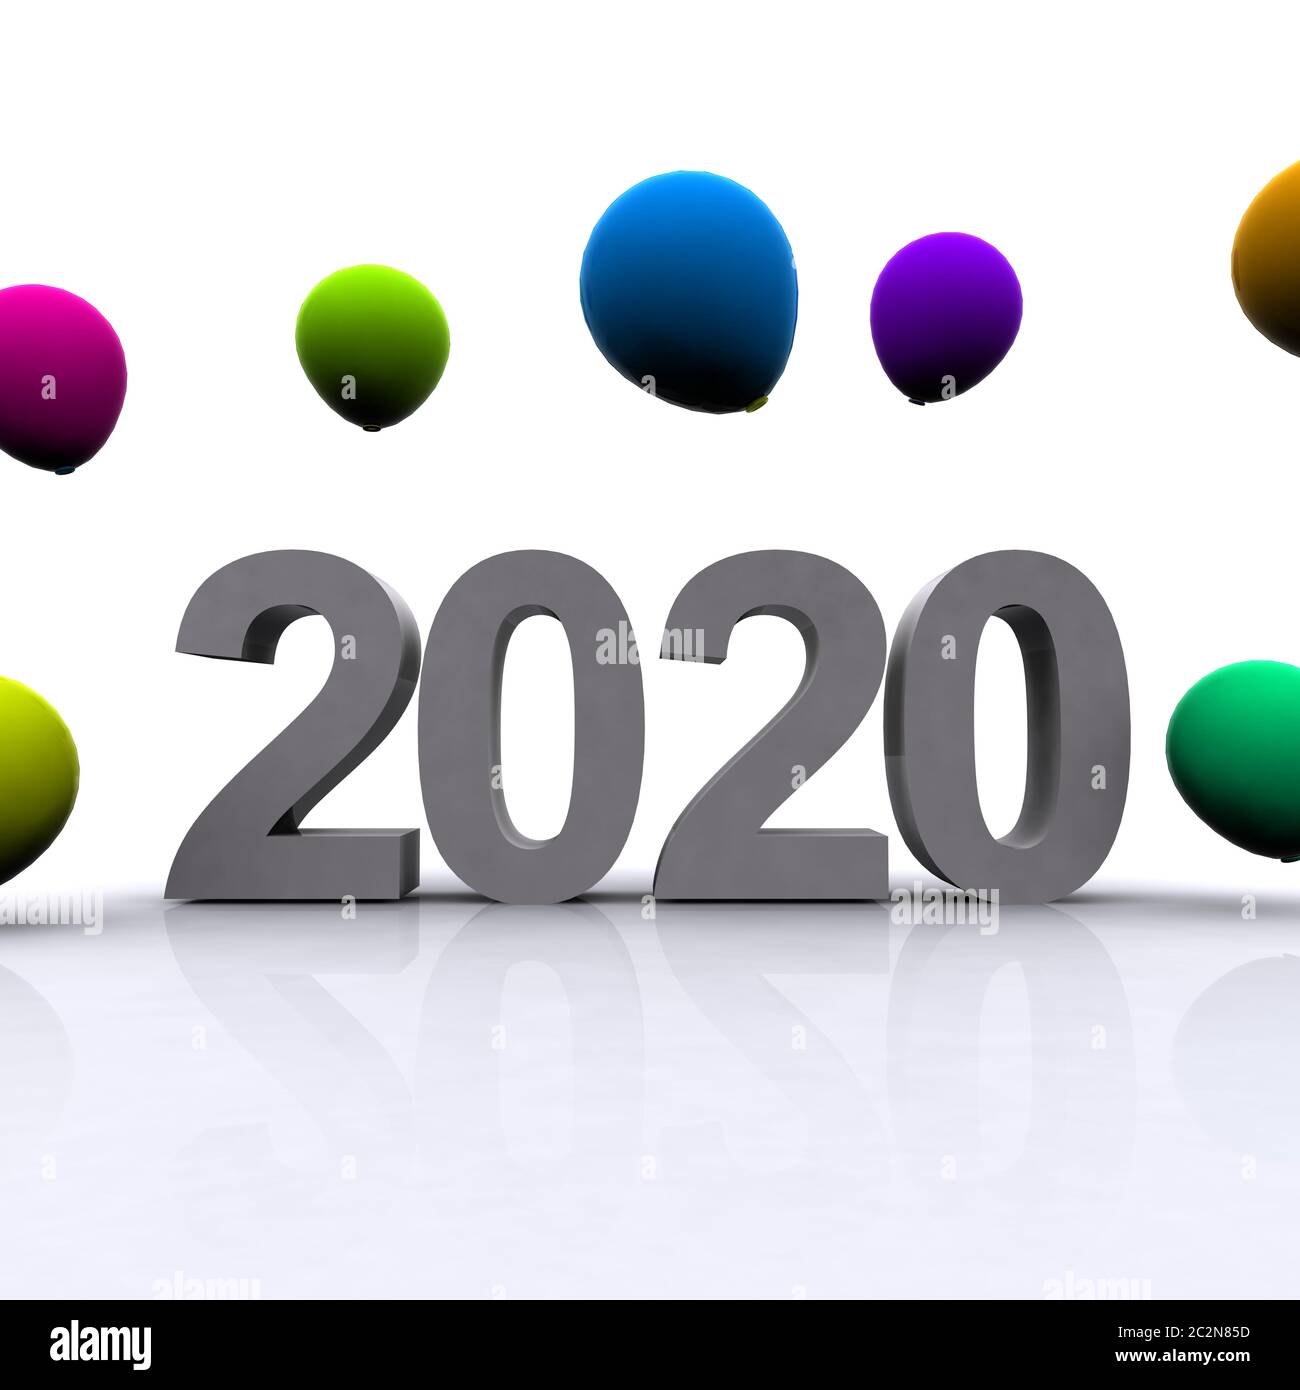 realization in 3d of the word 2020 with colored balloons Stock Photo